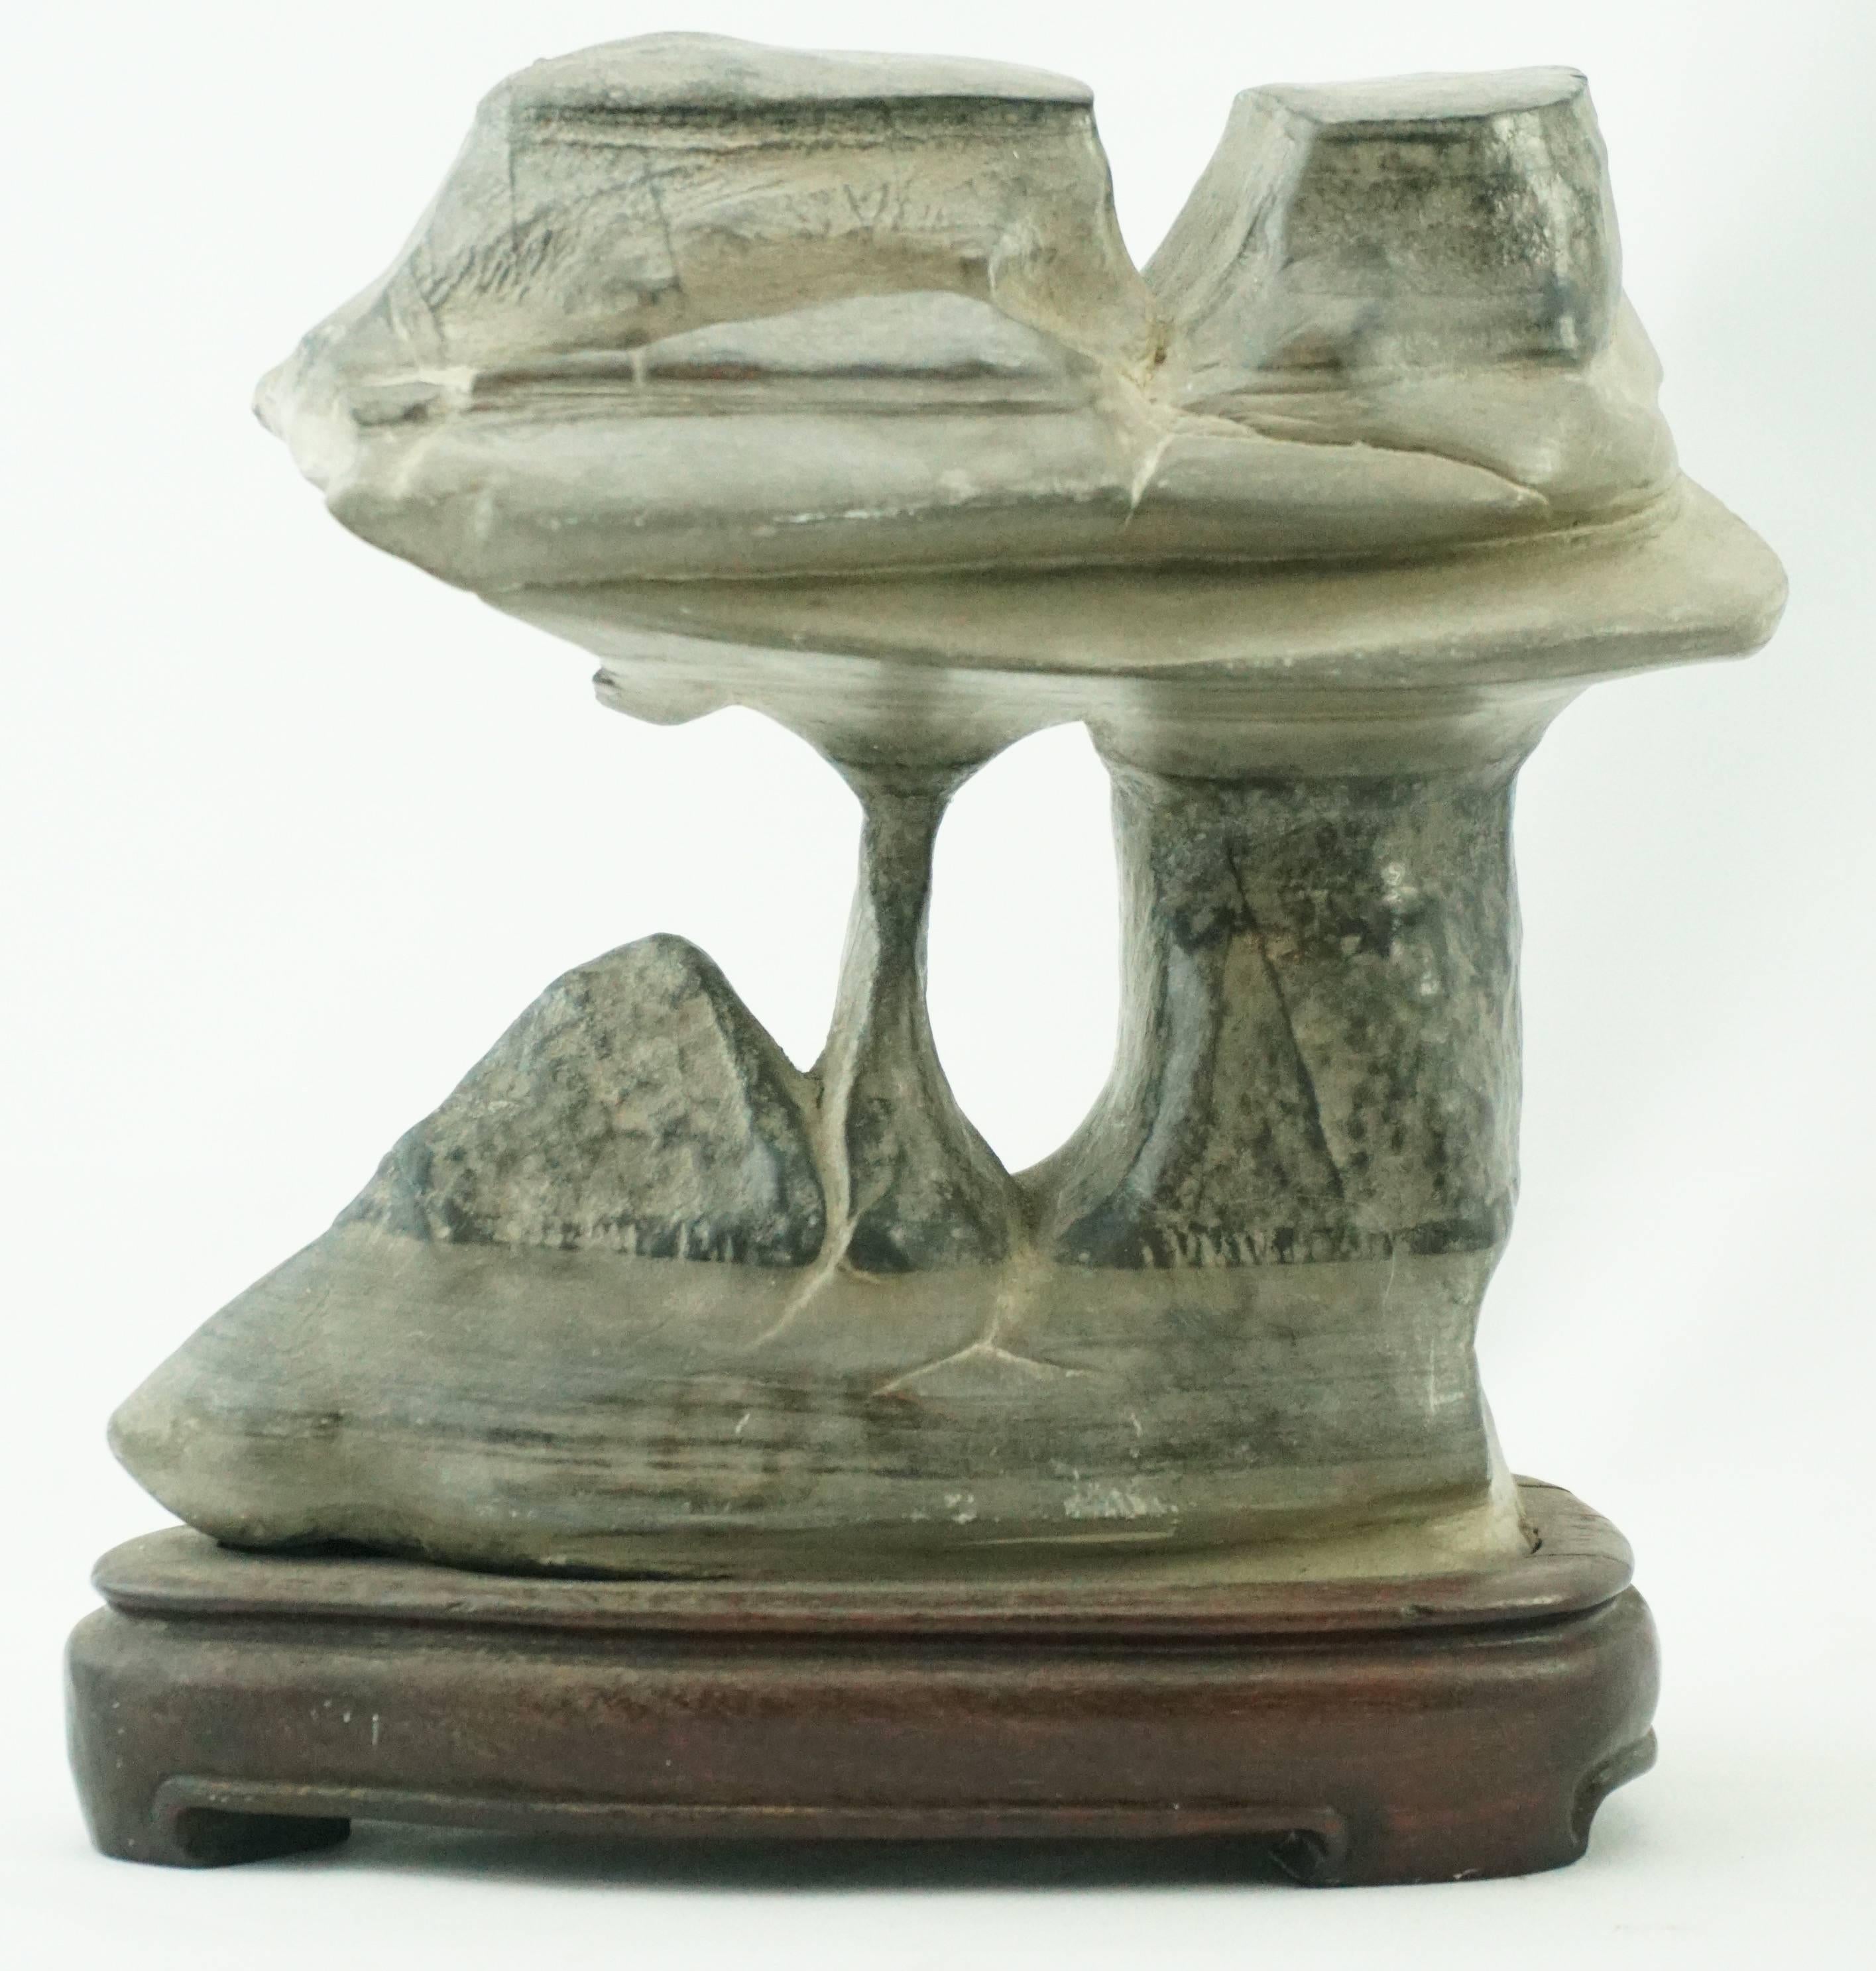 Chinese Qing scholar's stone

Measures: Height: 6.75 inches including wooden Stand
Width: 6 inches rock.

Scholars rocks can be any color, and contrasting colors are not uncommon. The size of the stone can also be quite varied: scholars rocks can